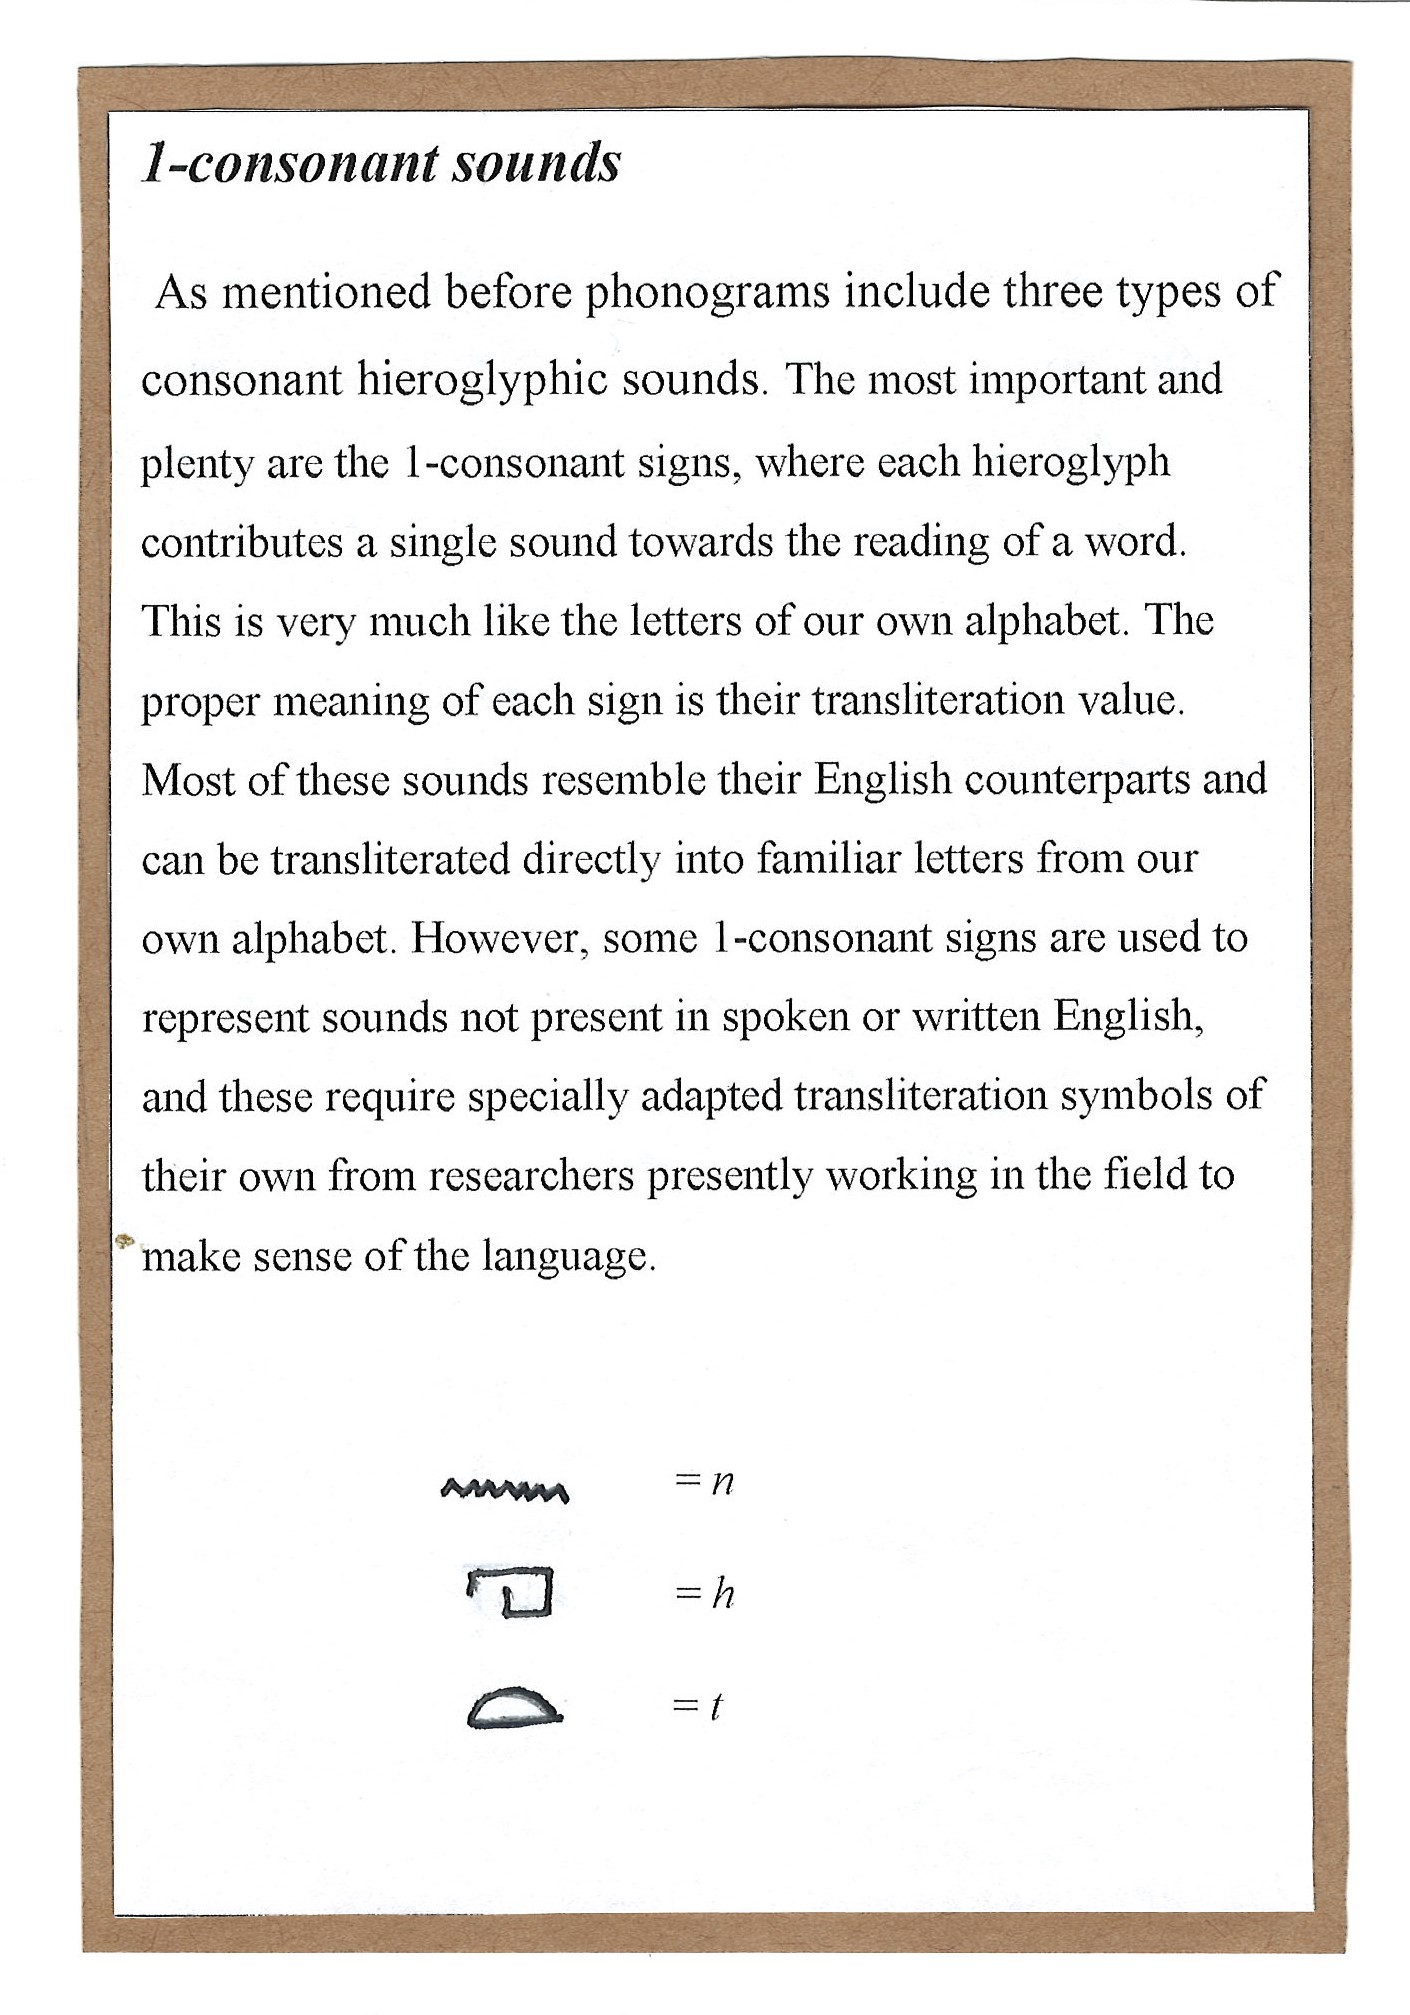 Page 5. A continuation of the exploration of phonograms with the large pool of examples of 1-consonant sounds.